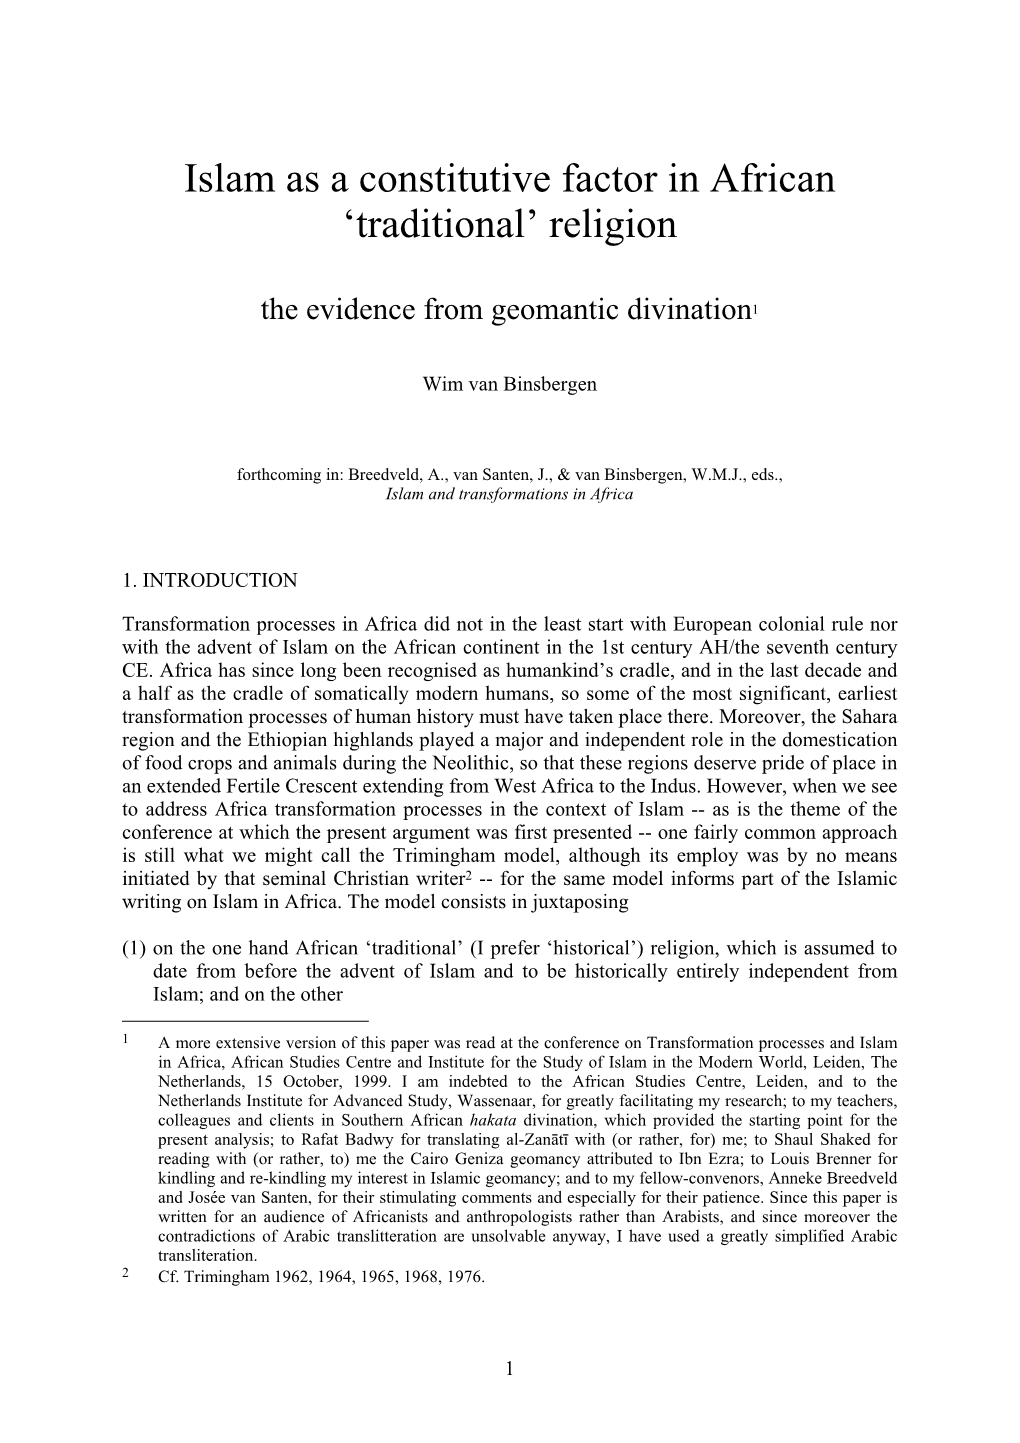 Islam As a Constitutive Factor in African 'Traditional' Religion